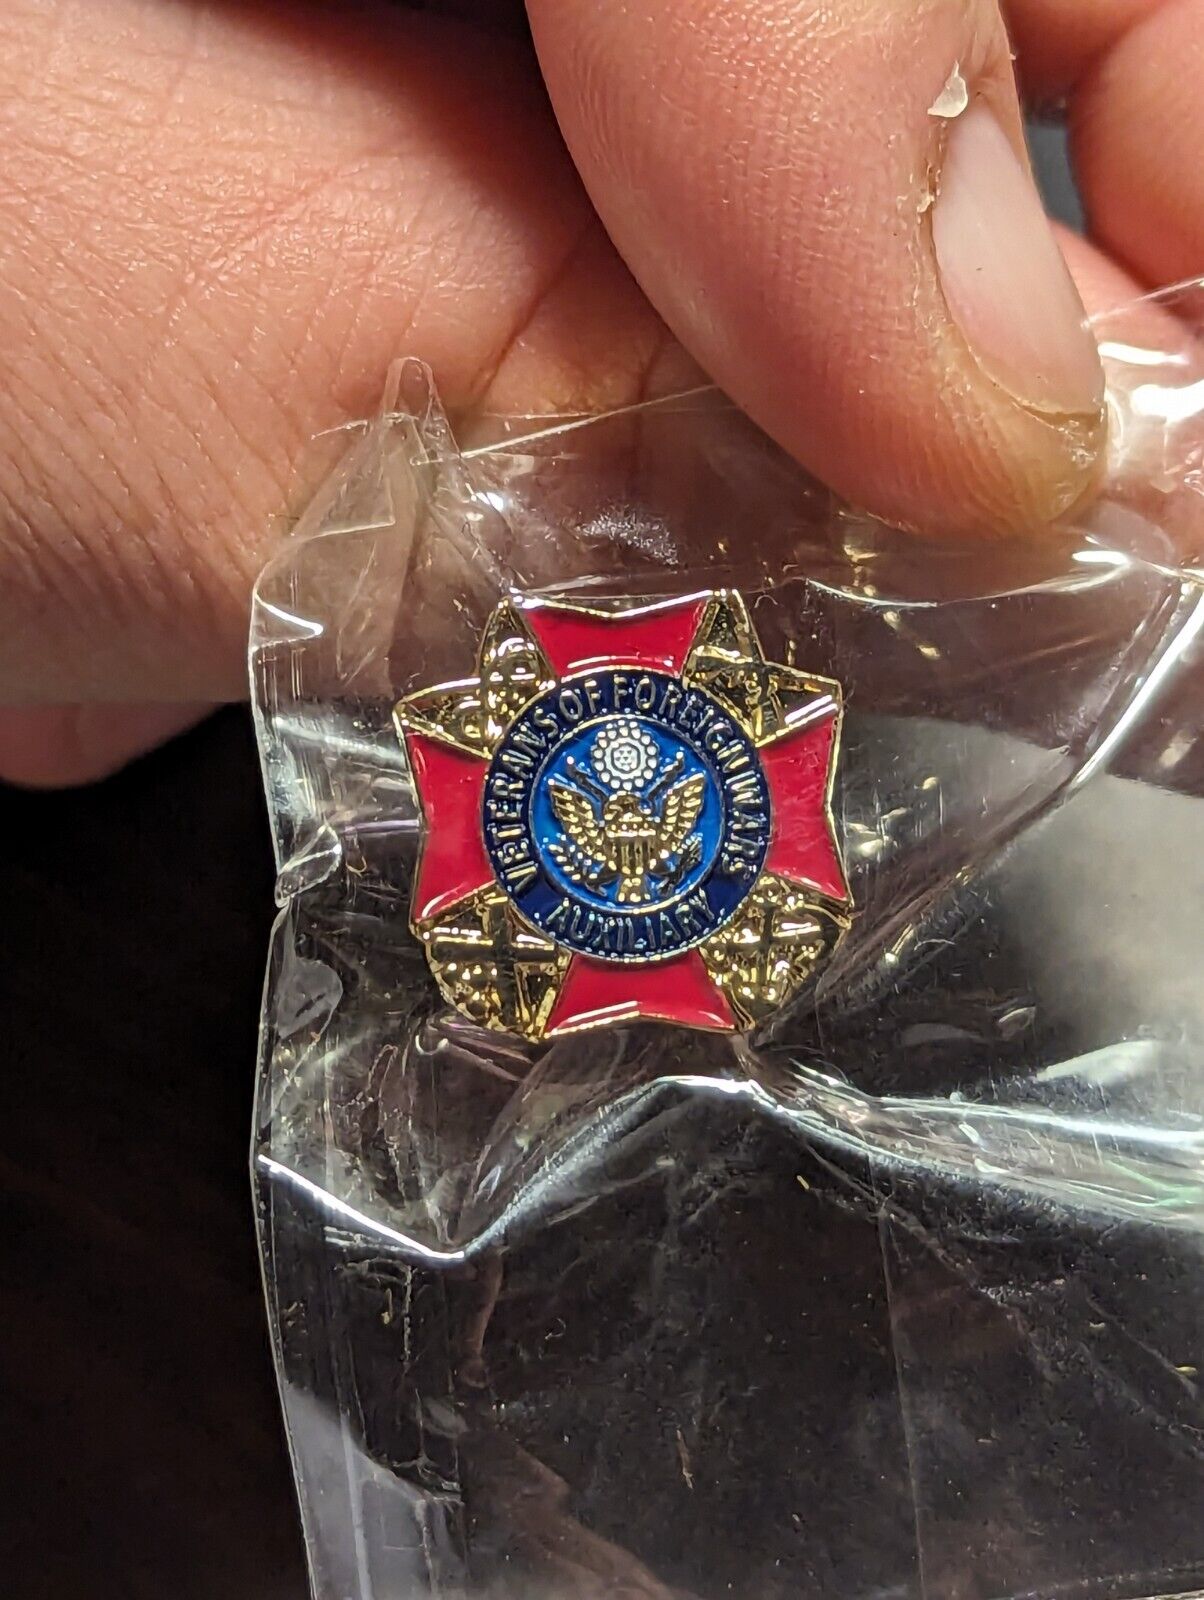 NEW VFW Veterans of Foreign Wars Auxiliary Lapel Hat Pin Pinback Jewelry 